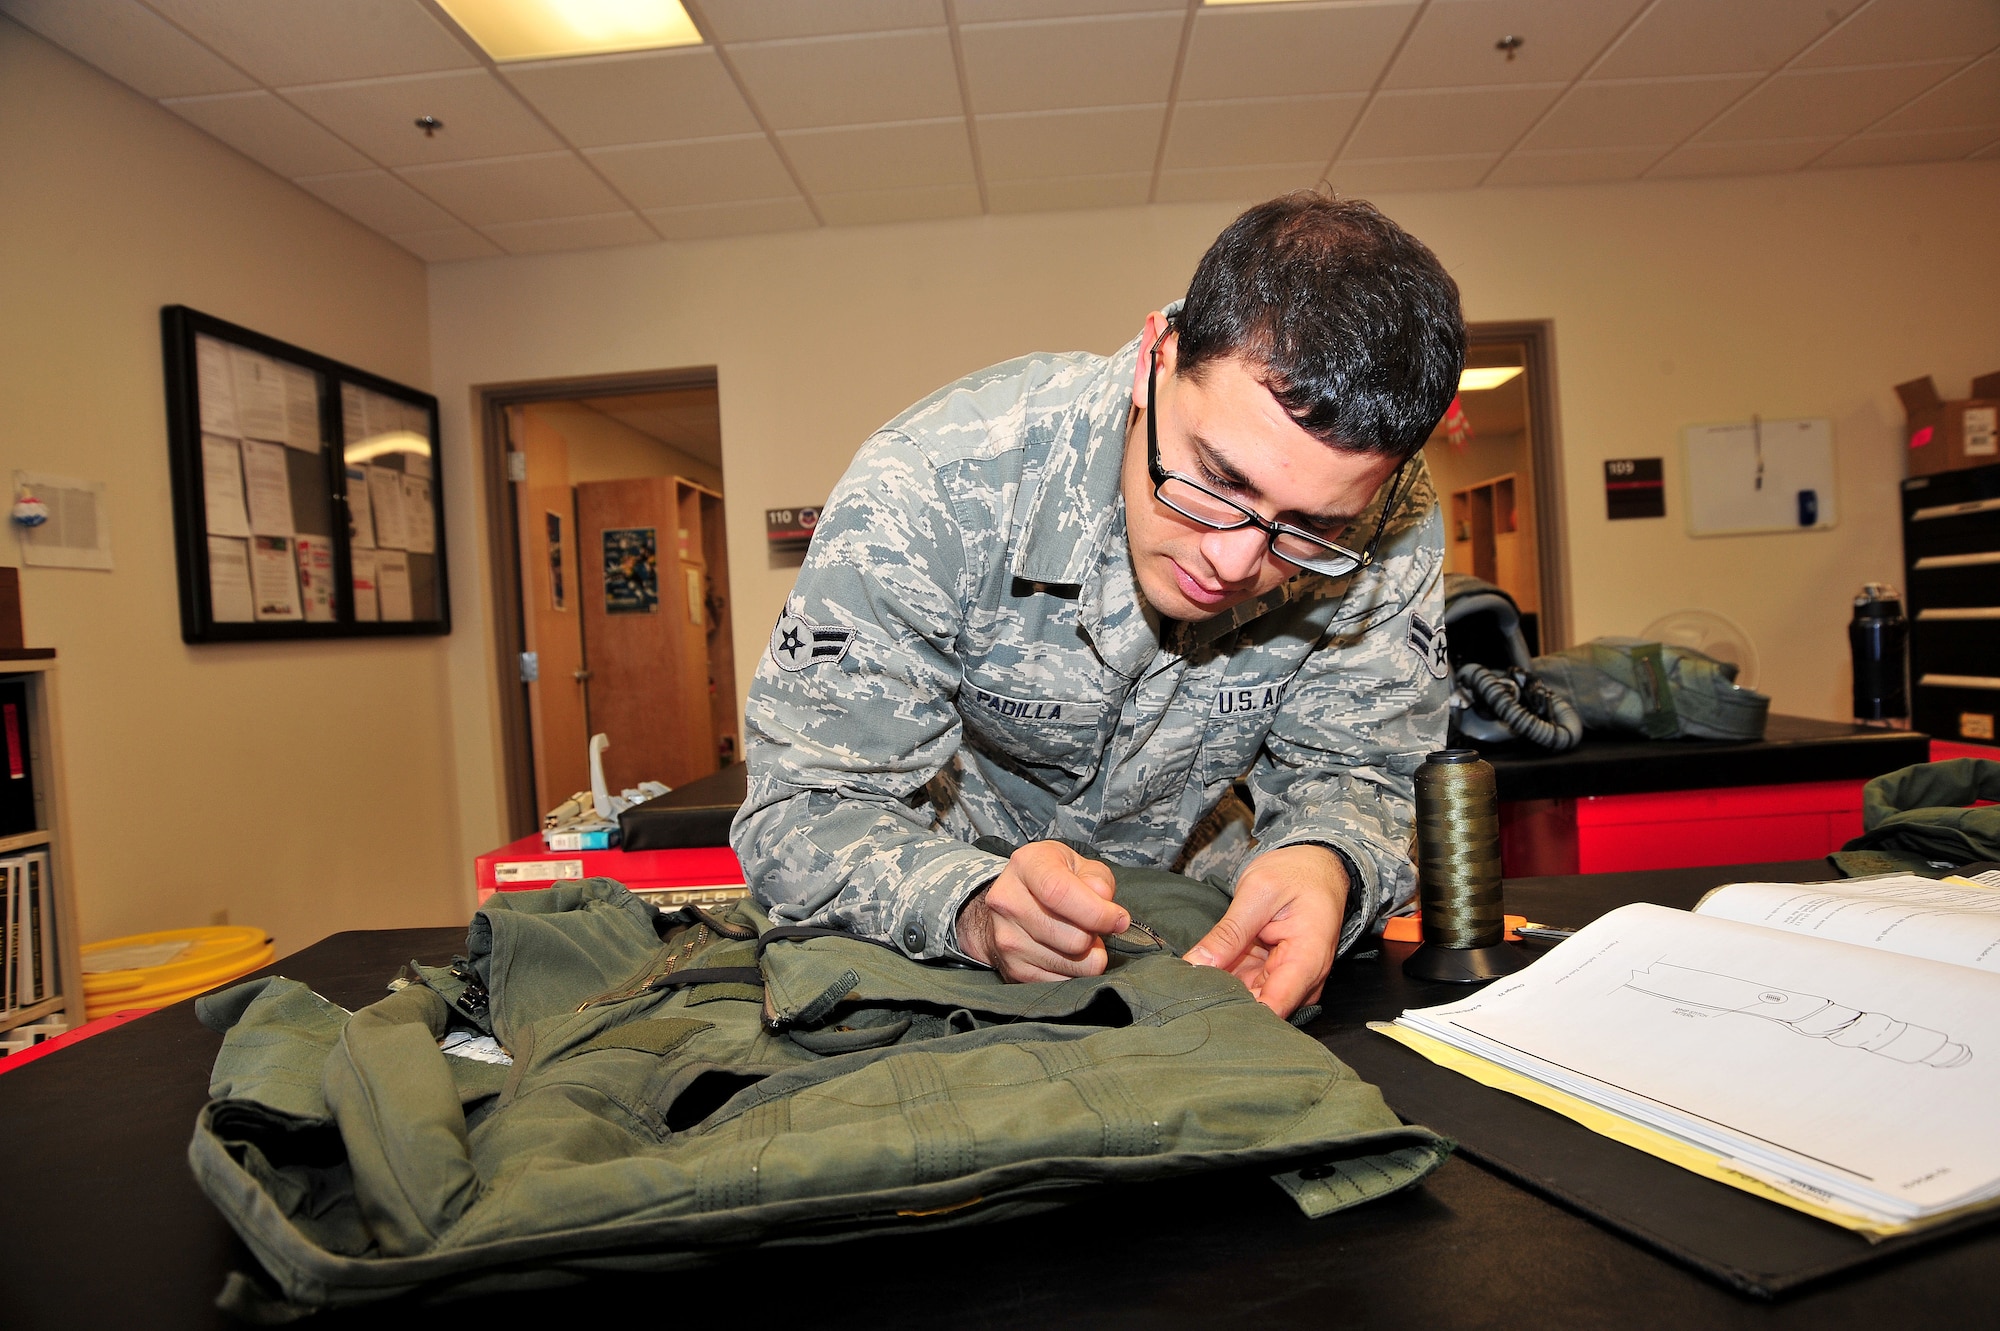 U.S. Air Force Airman 1st Class Jose Padilla, 355th Operations Support Squadron air crew flight equipment technician, repairs small holes and tears in a gravity suit at Davis-Monthan Air Force Base, Ariz., Nov. 7, 2013. Aside from repairing holes, padilla is also for flight equipment such as helmts oxygen masks, parachutes, floatation devices, survival kits, night vision goggles, and many other types of flight equipment.(U.S. Air Force photo by Senior Airman Josh Slavin/Released)